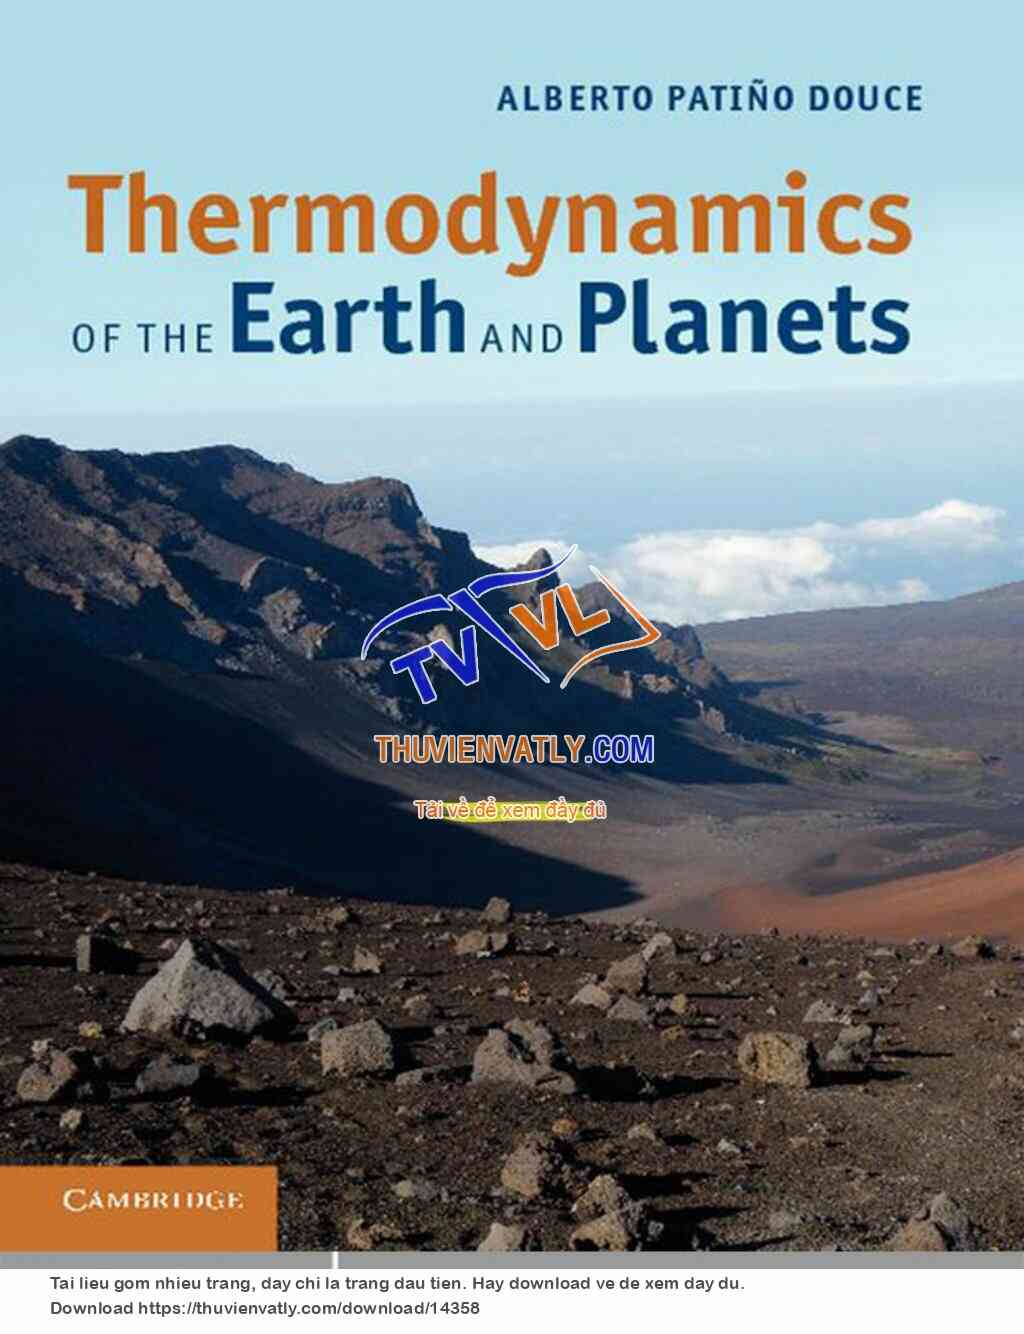 Thermodynamics of the Earth and Planets - A. Douce (Cambridge, 2011)